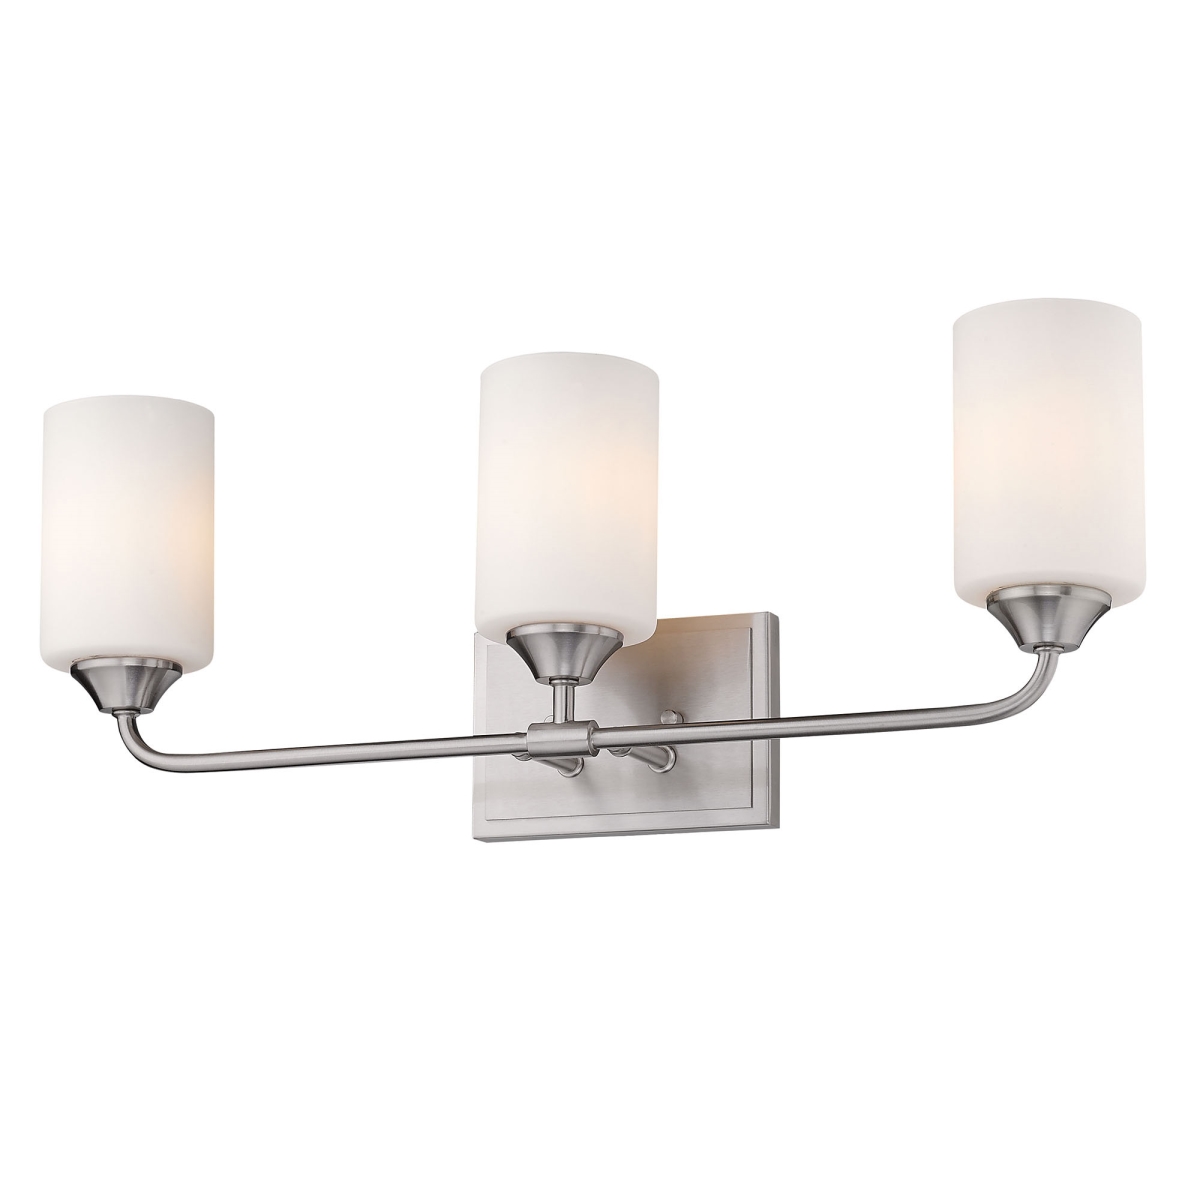 2120-ba3 Pw-cyl-op Ormond 3 Light Bath Vanity In Pewter With Cylindrical Opal Glass Shade